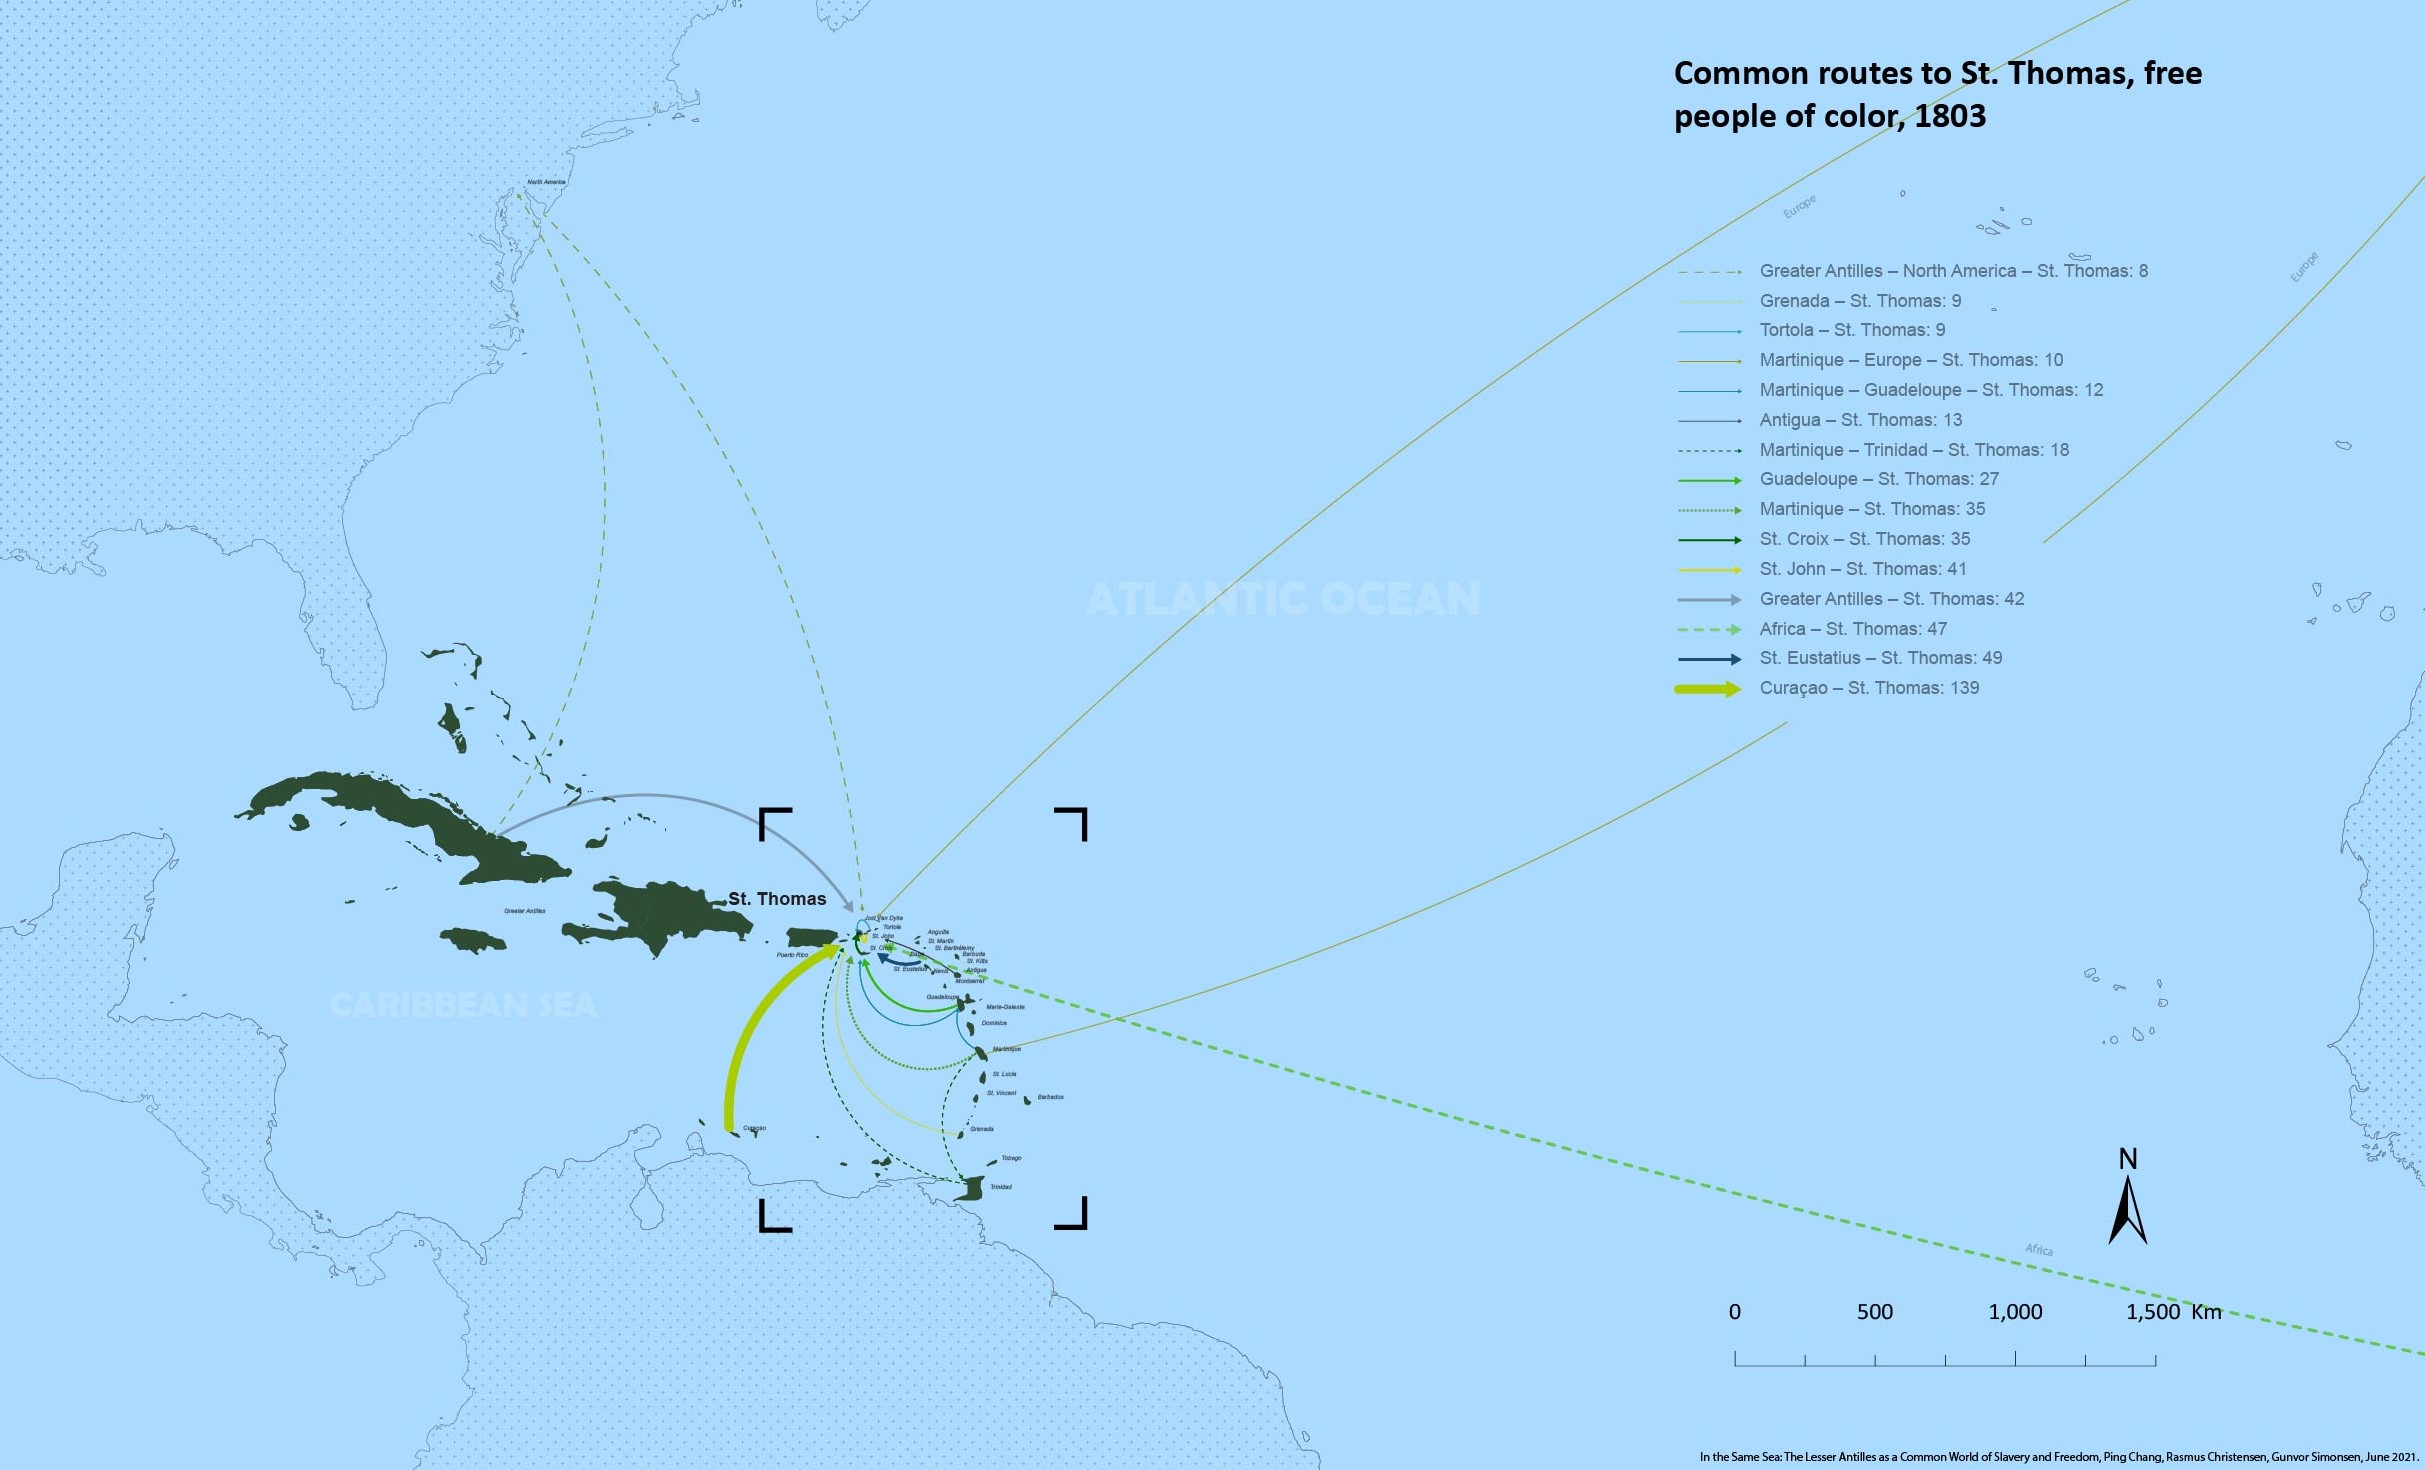 Common routes to St. Thomas, free people of color, 1803